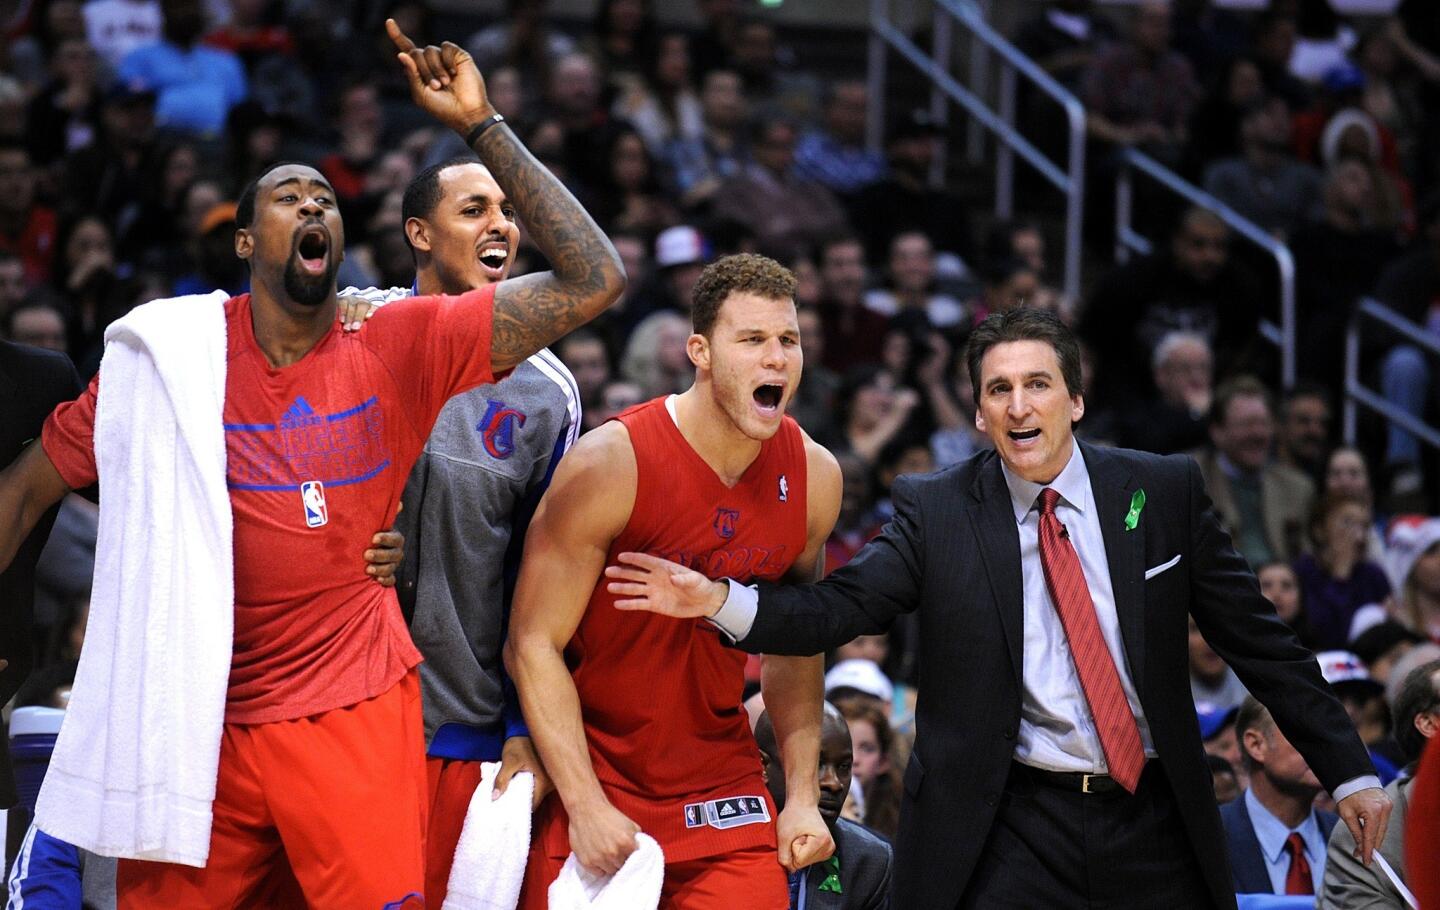 Clippers Coach Vinny Del Negro tries to keep (from left) DeAndre Jordan, Ryan Hollins and Blake Griffin from spilling onto the court as they celebrate in the closing minutes of their 112-100 victory over the Nuggets on Tuesday night.